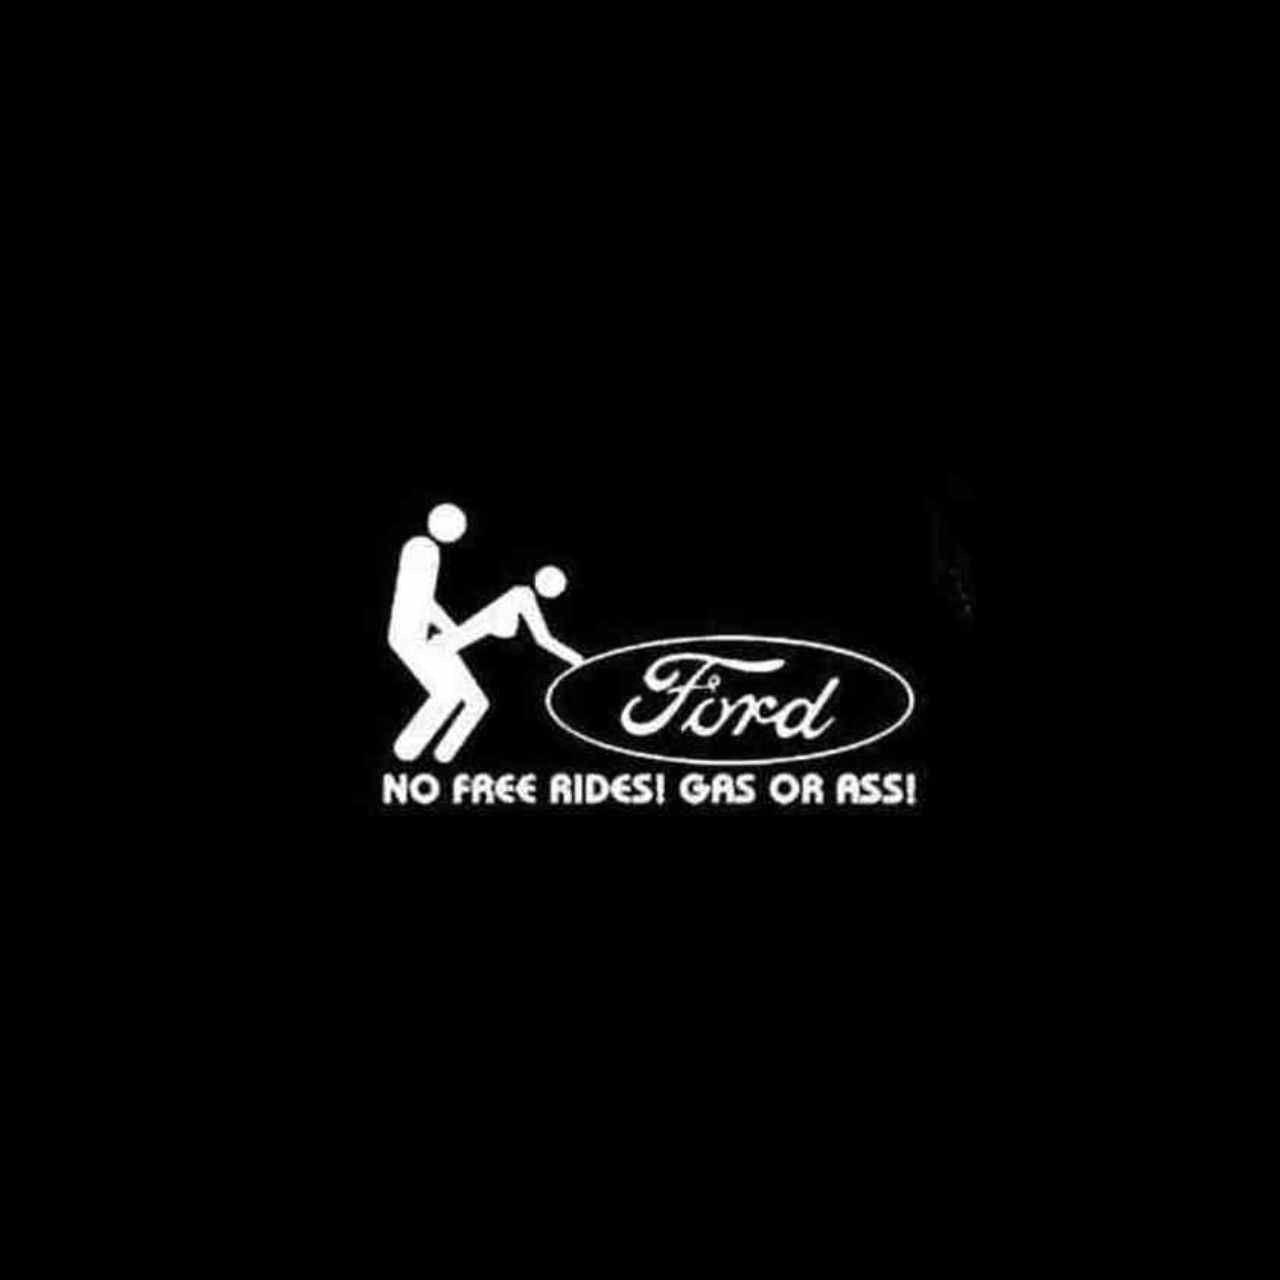 Ford logo Vinyl Decal Window Laptop Any Size Any Color